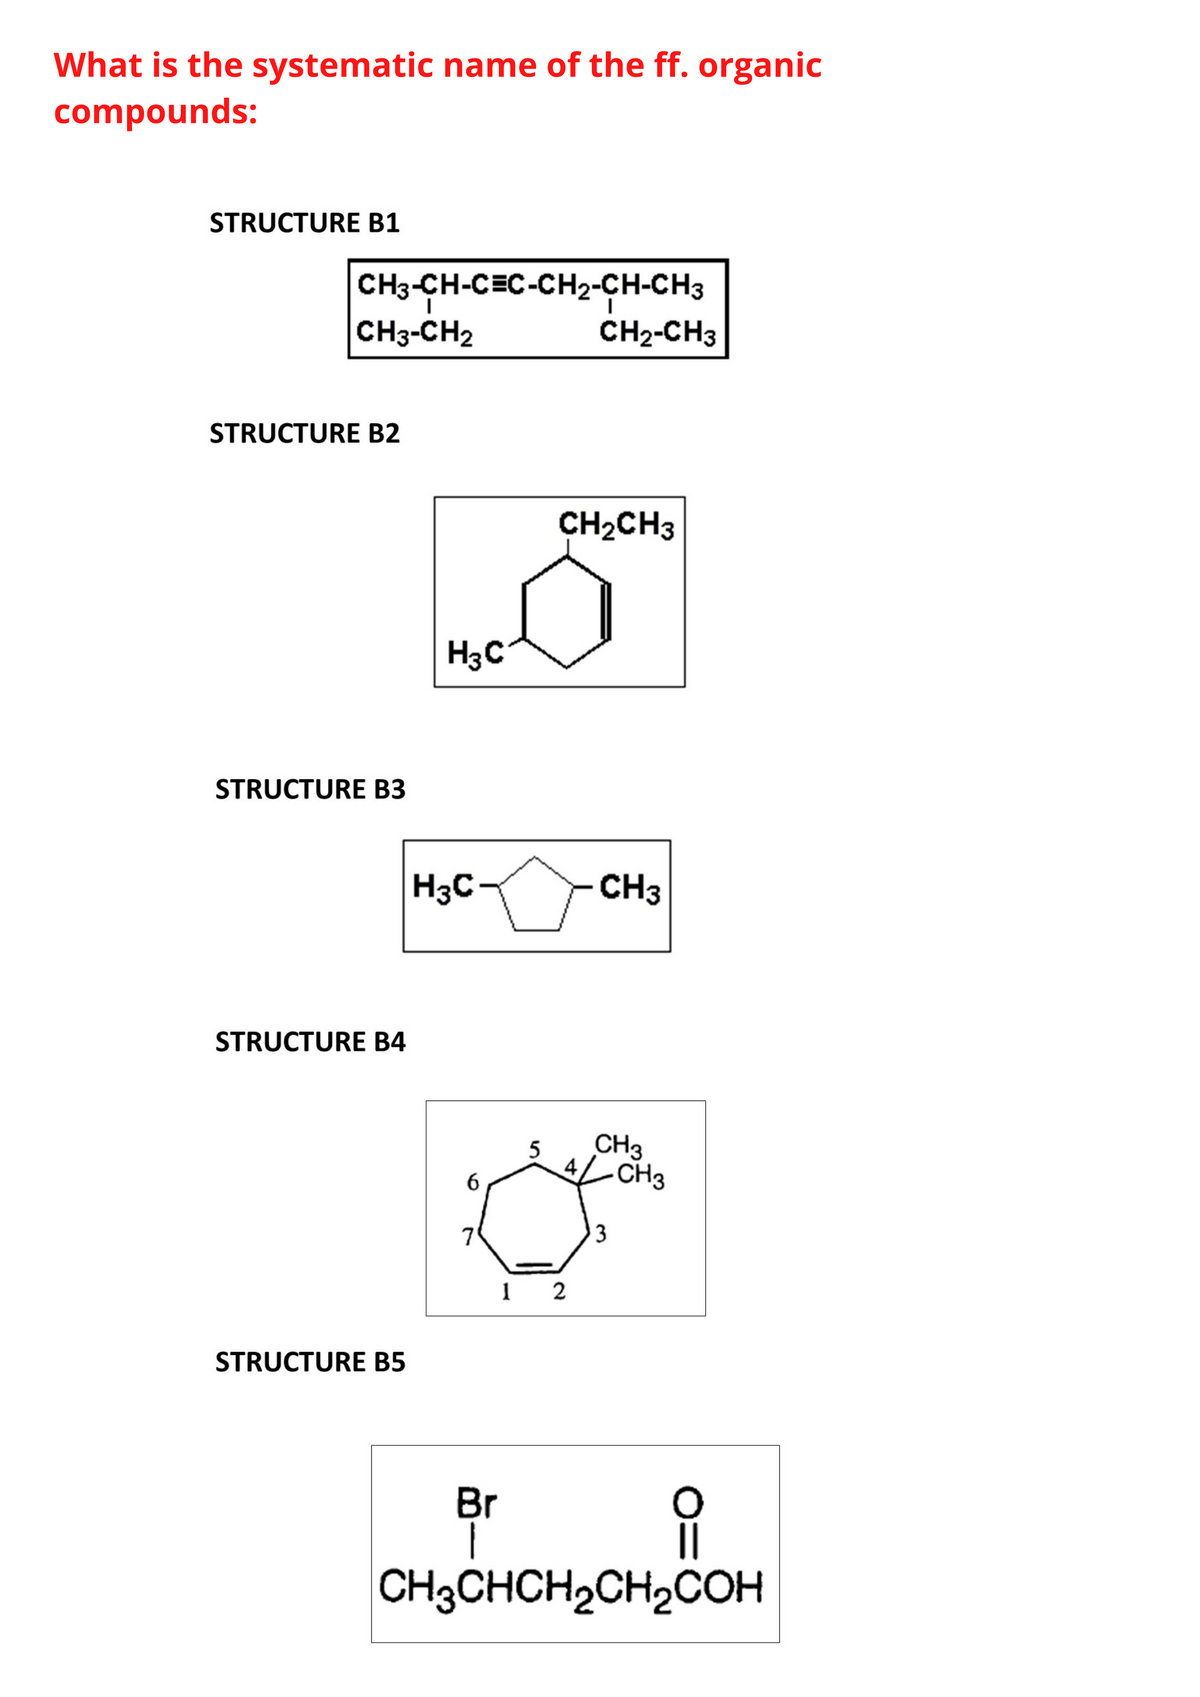 What is the systematic name of the ff. organic
compounds:
STRUCTURE B1
CH3-CH-CEC-CH2-CH-CH3
CH3-CH2
CH2-CH3
STRUCTURE B2
CH2CH3
H3C
STRUCTURE B3
H3C-
CH3
STRUCTURE B4
5
CH3
4,
CH3
7
3
1 2
STRUCTURE B5
Br
CH3CHCH2CH2COH
